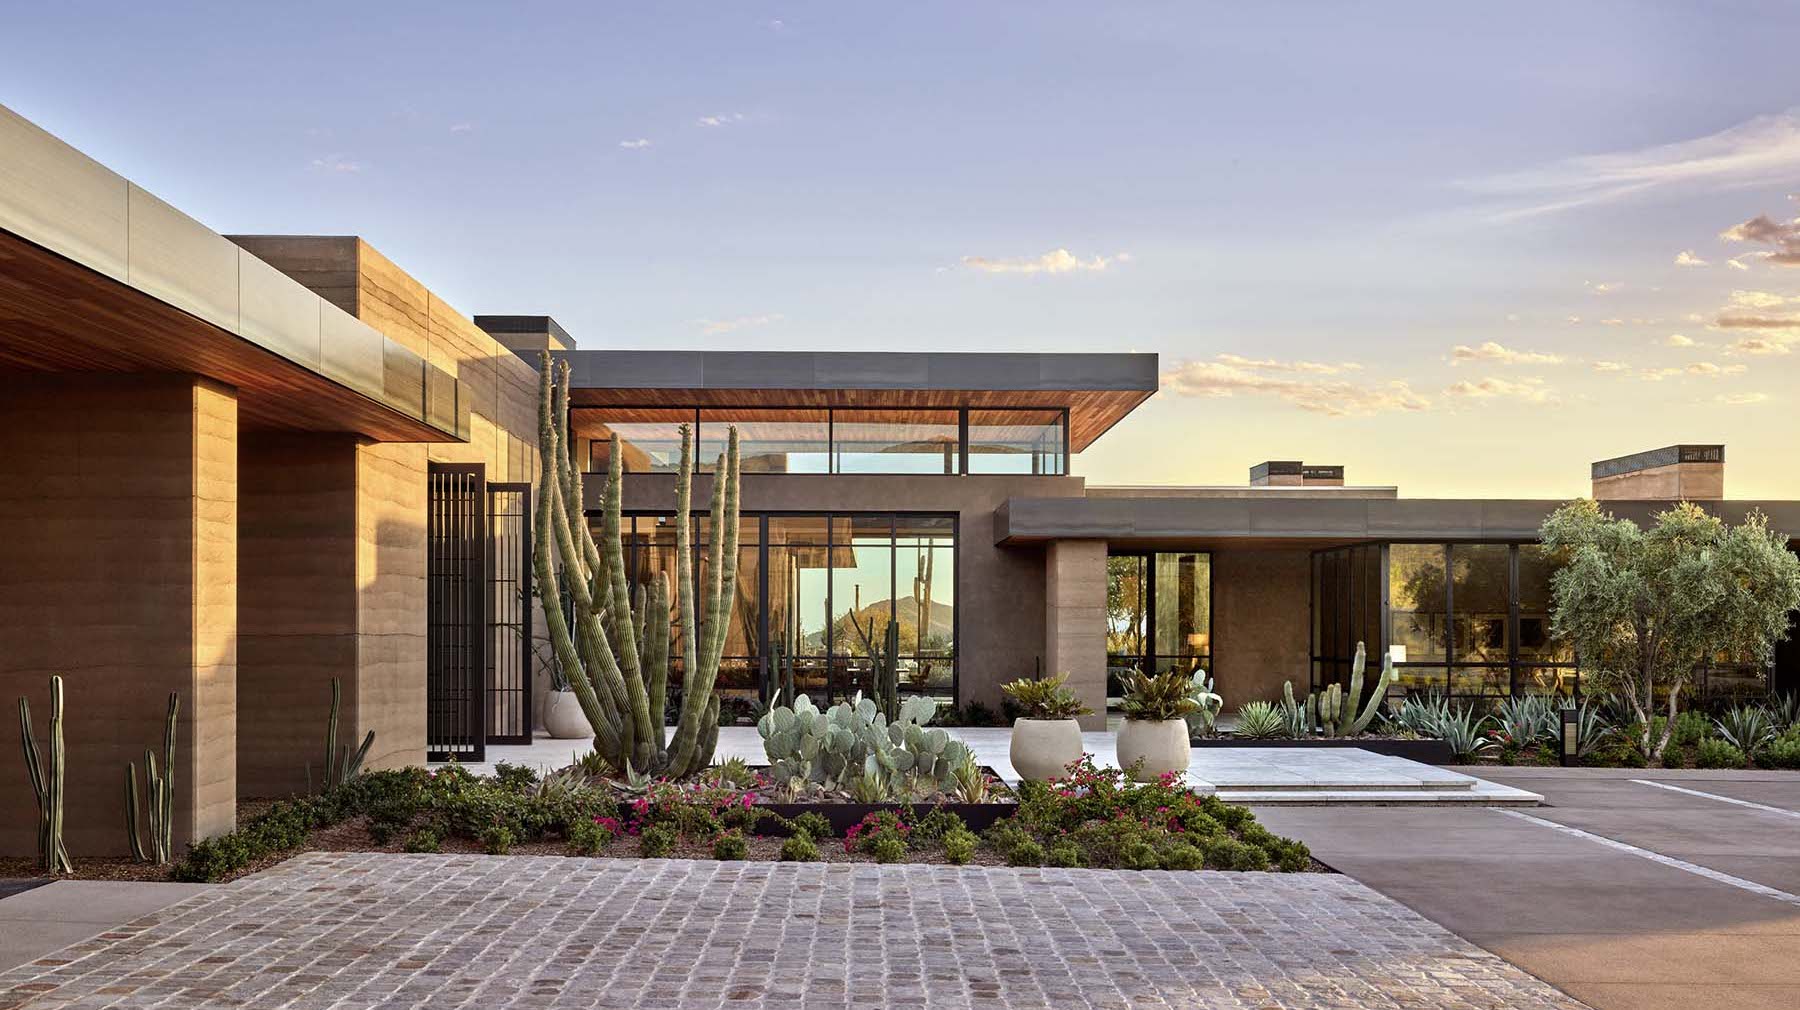 STRATA feature 1 Located in Scottsdale Ariz Drewett Works is an award winning architecture firm specializing in luxury residential hospitality and commercial architecture